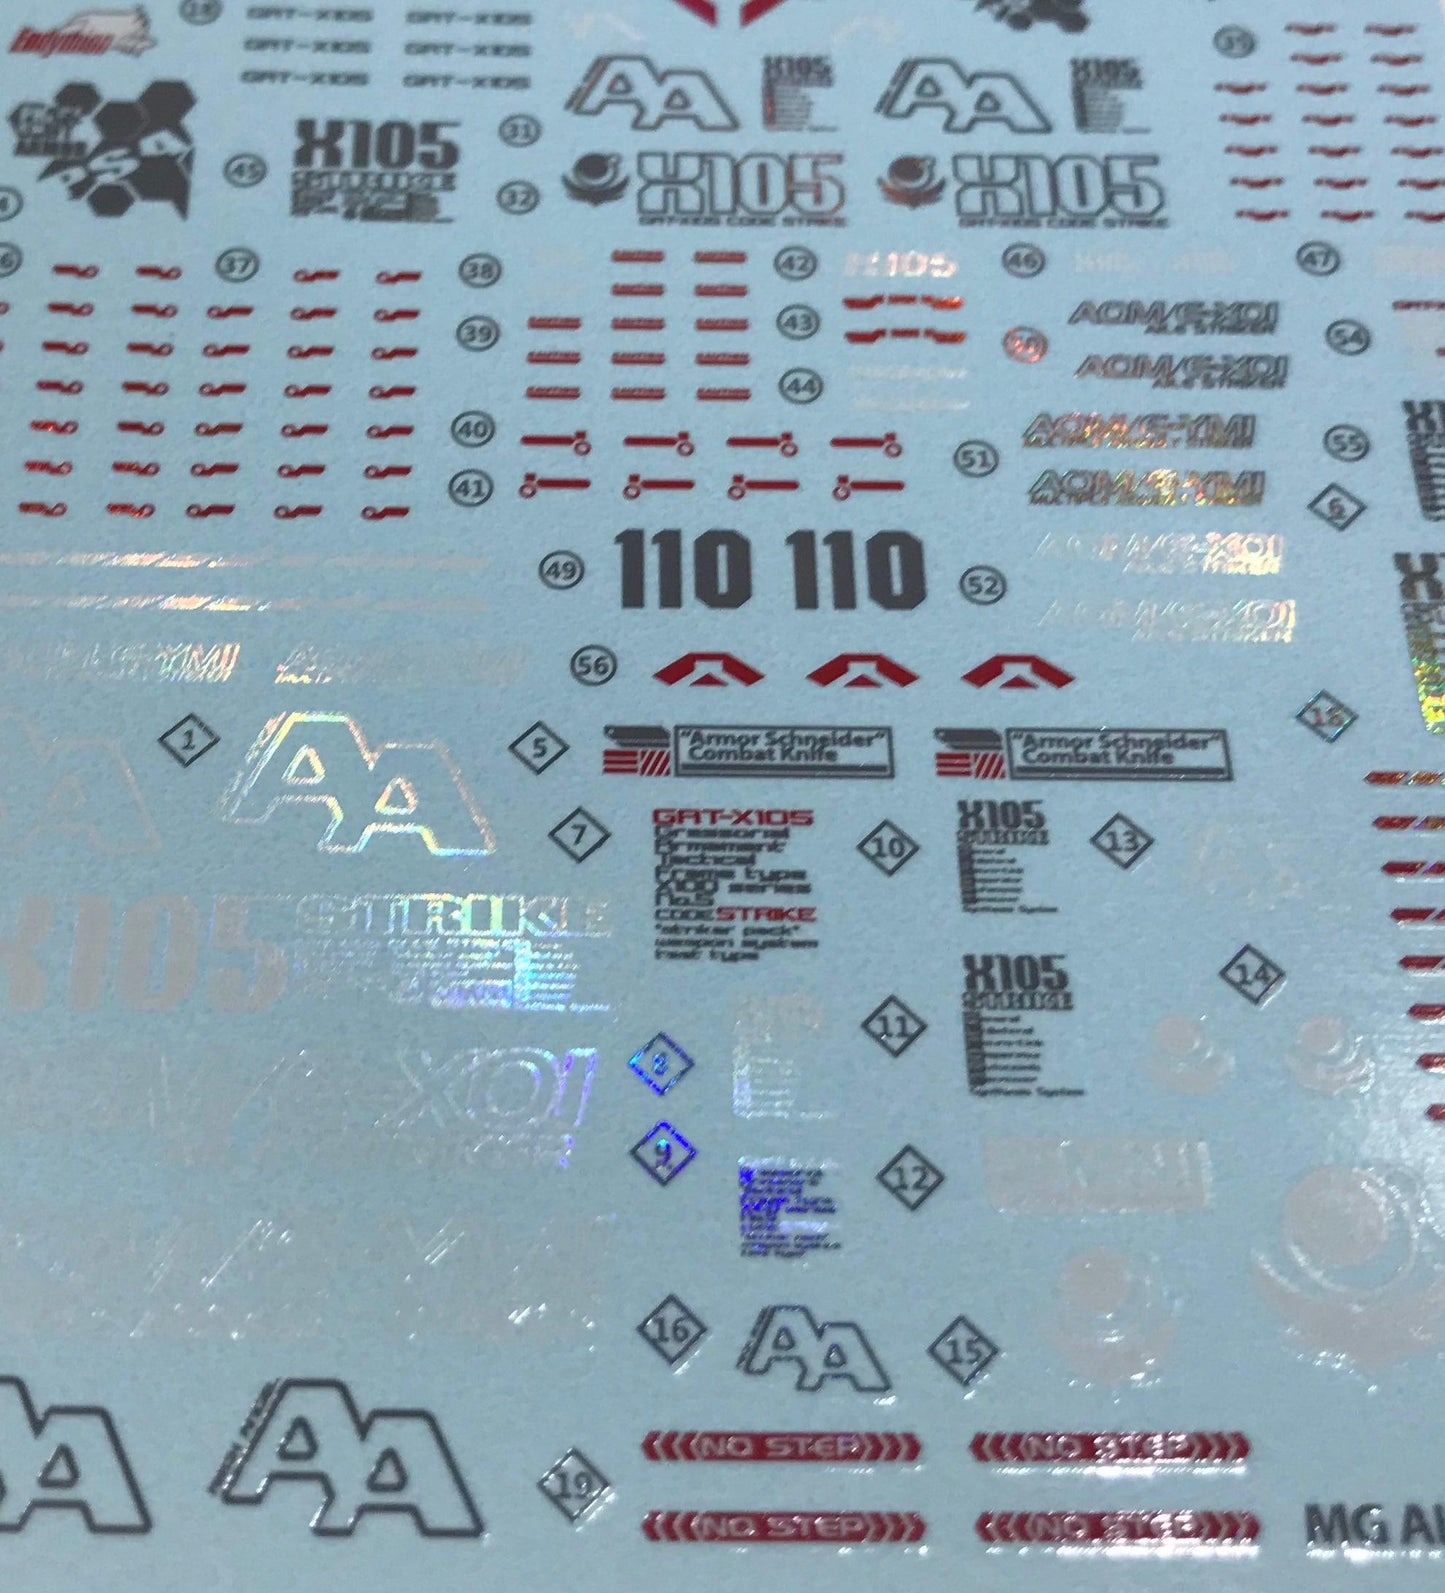 Delpi - MG AILE STRIKE Ver. RM WATER DECAL - Holo